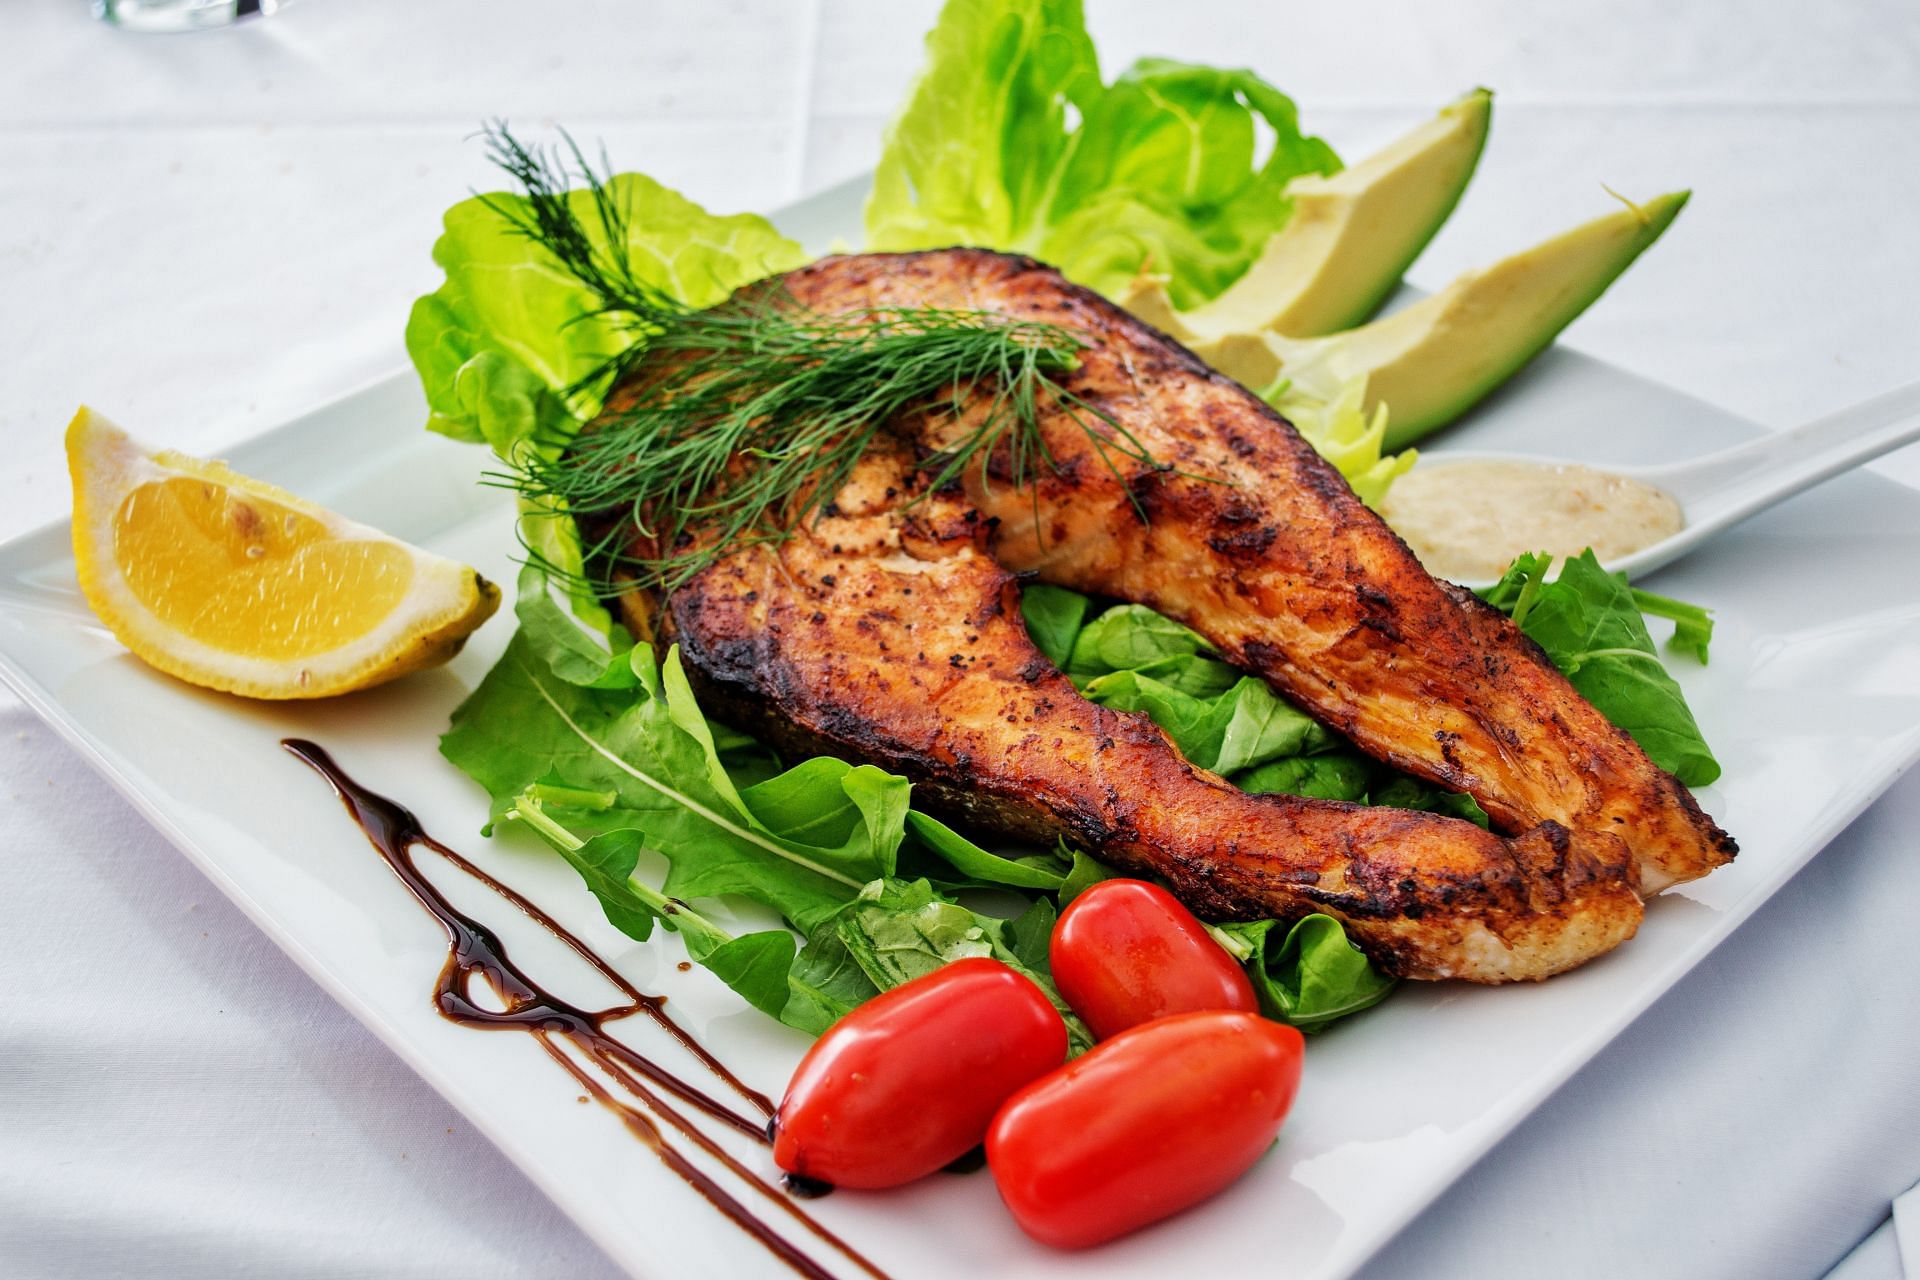 Adding Fish to your menopause diet (image sourced via Pexels / Photo by Kindel MediaDana Tentis)